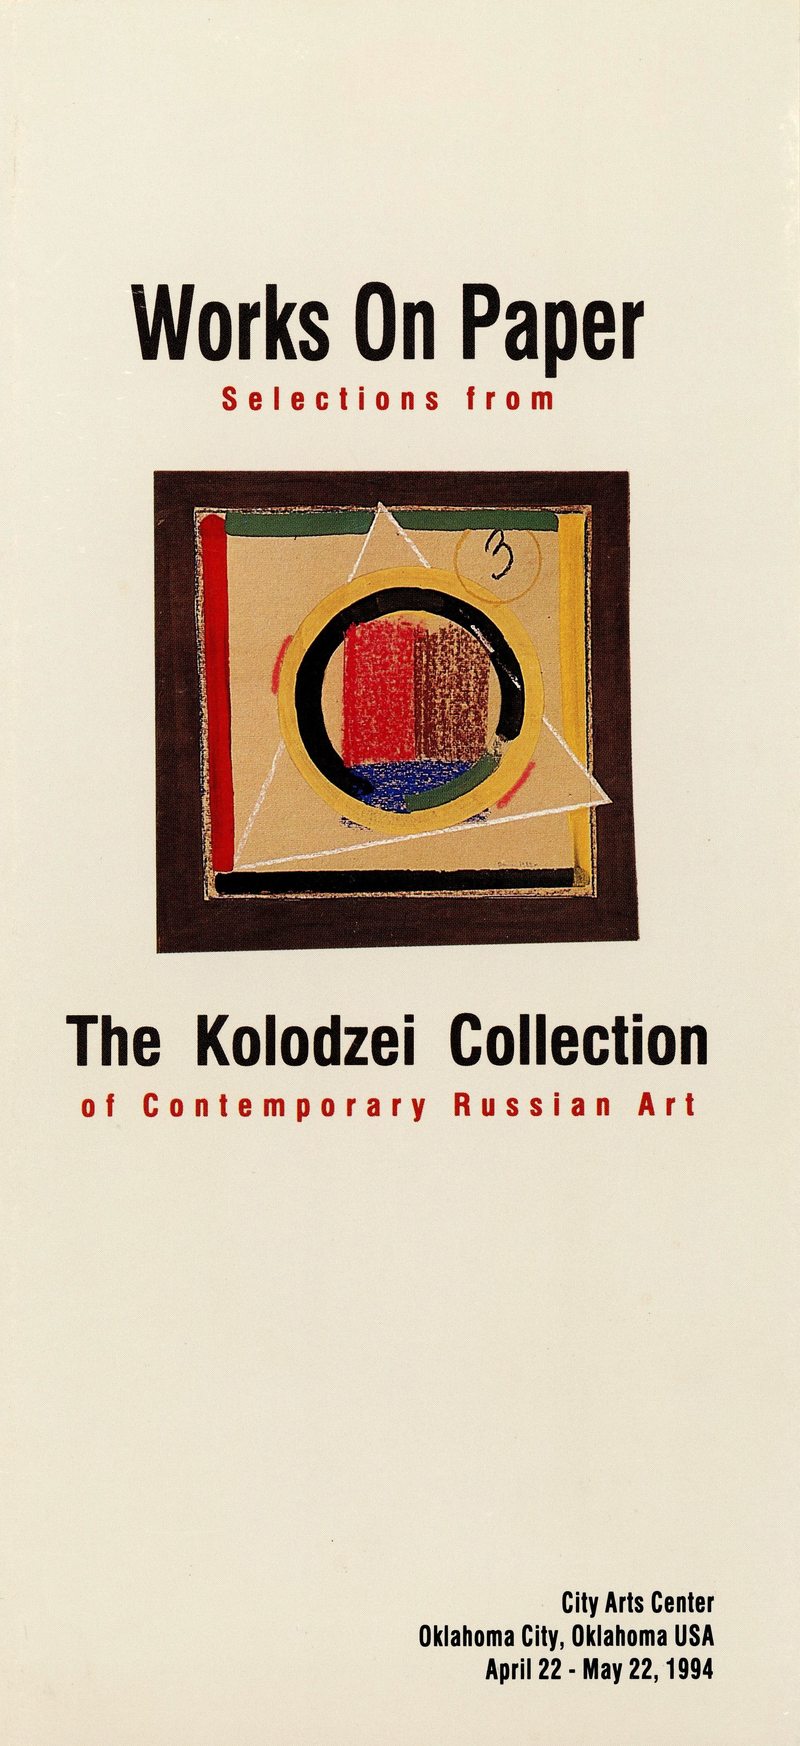 Works On Paper. Selections from The Kolodzei Collection of Contemporary Russian Art